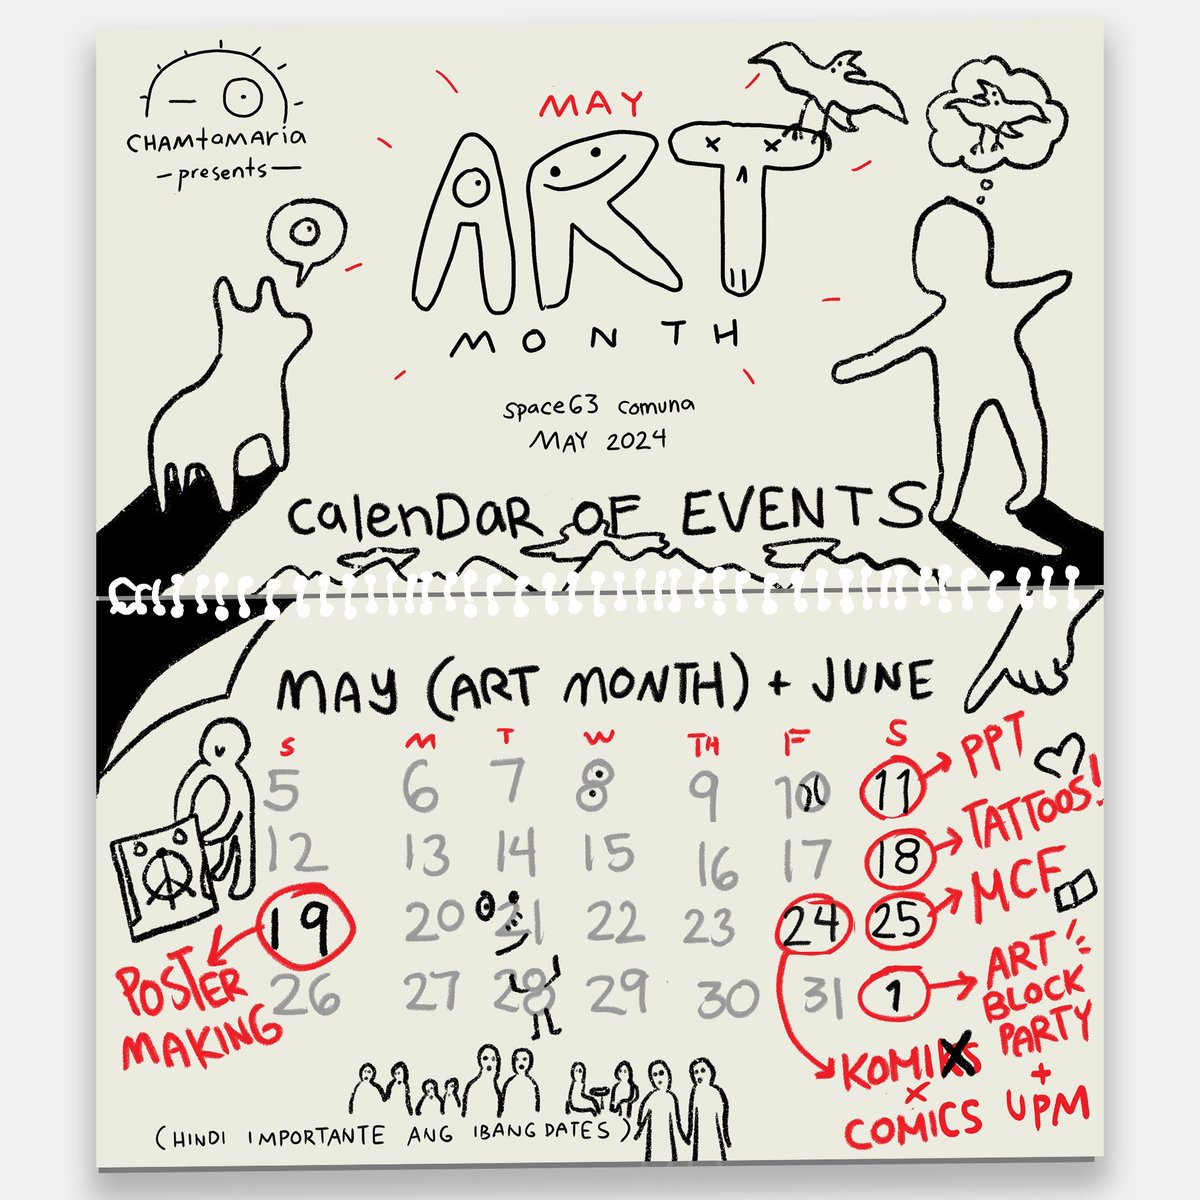 The master calendar schedule of activities (Part One) for Chamtamaria Presents May Art Month! Interested in Powerpoint parties or Tattoos or Poster Making Contests For Adults or Manila Comics Fair?!?! witness! 